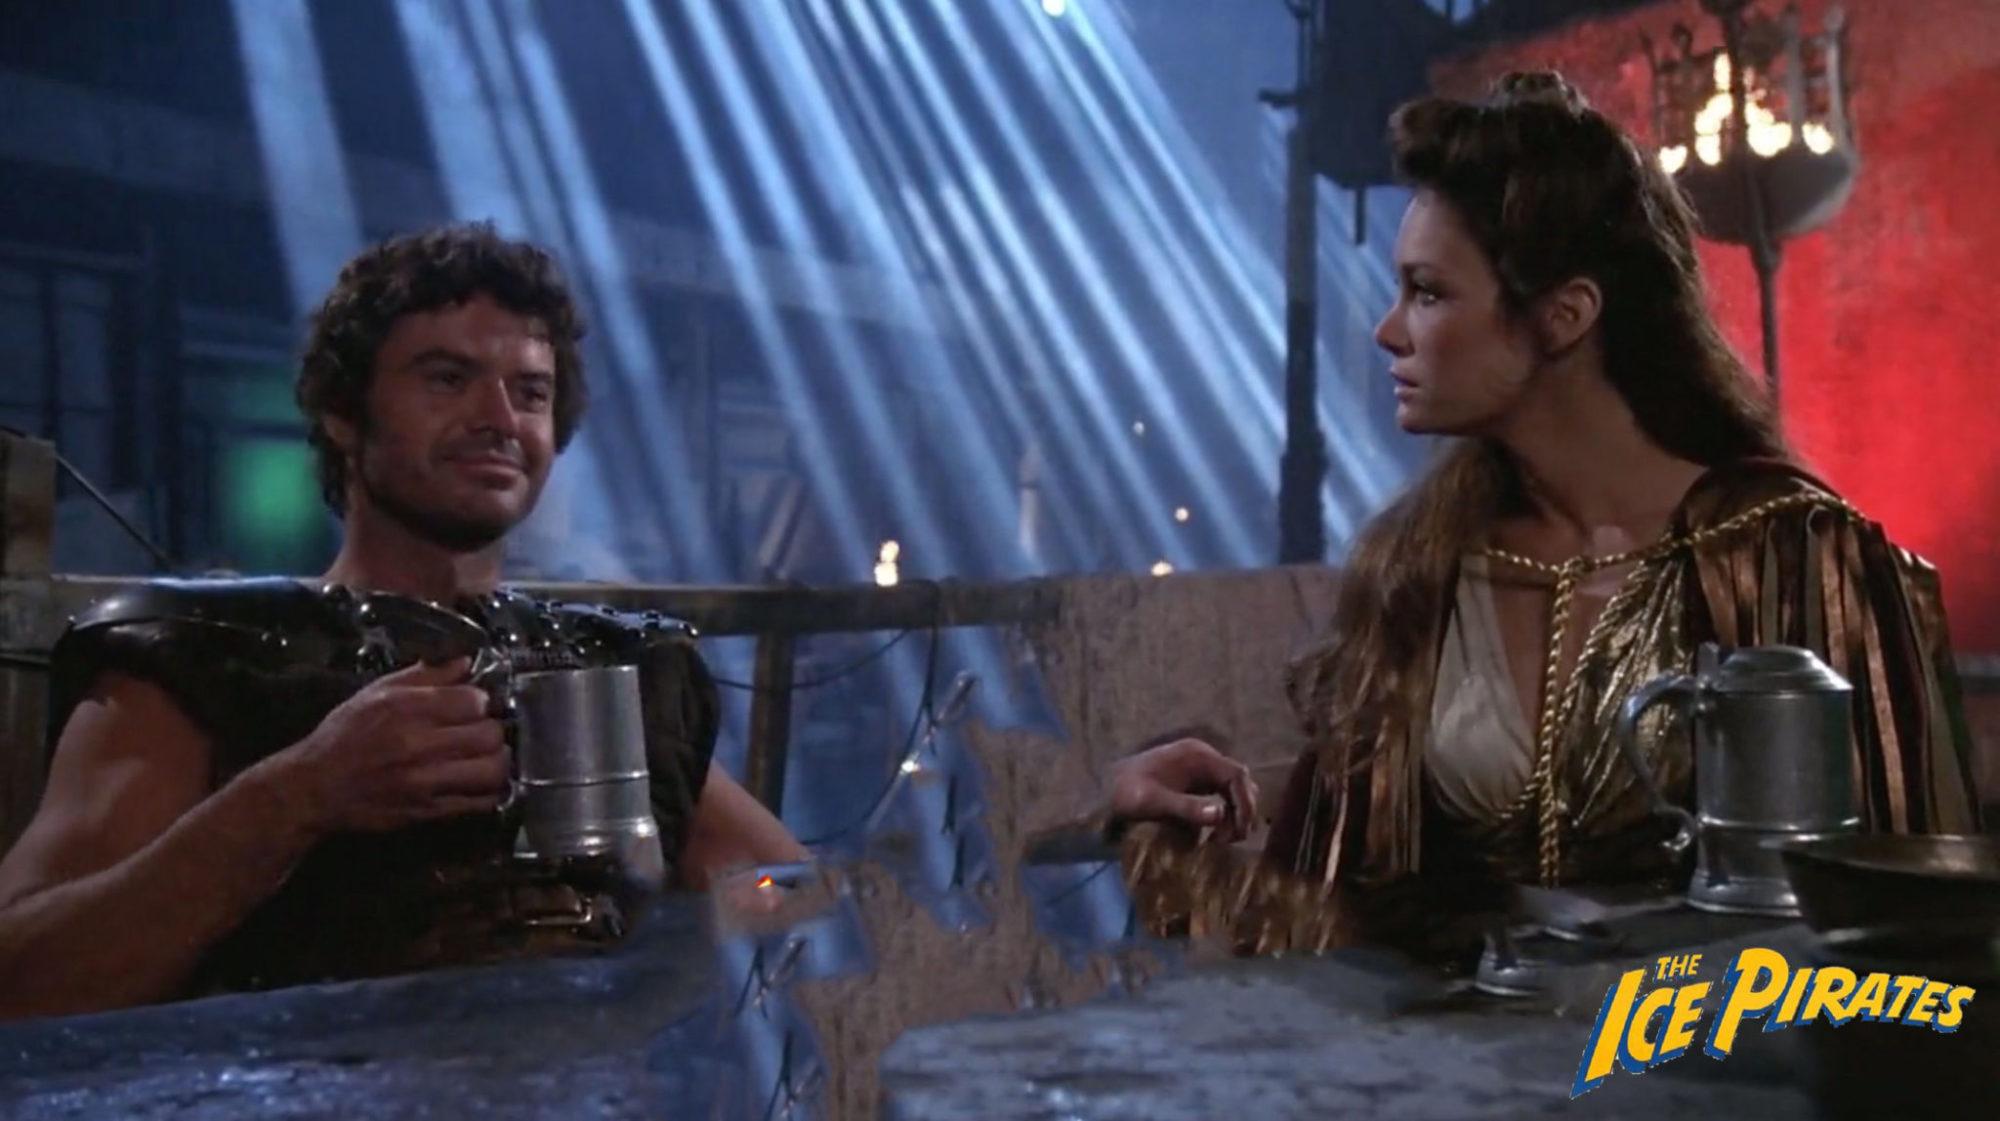 Robert Urich and Mary Crosby in The Ice Pirates (1984)